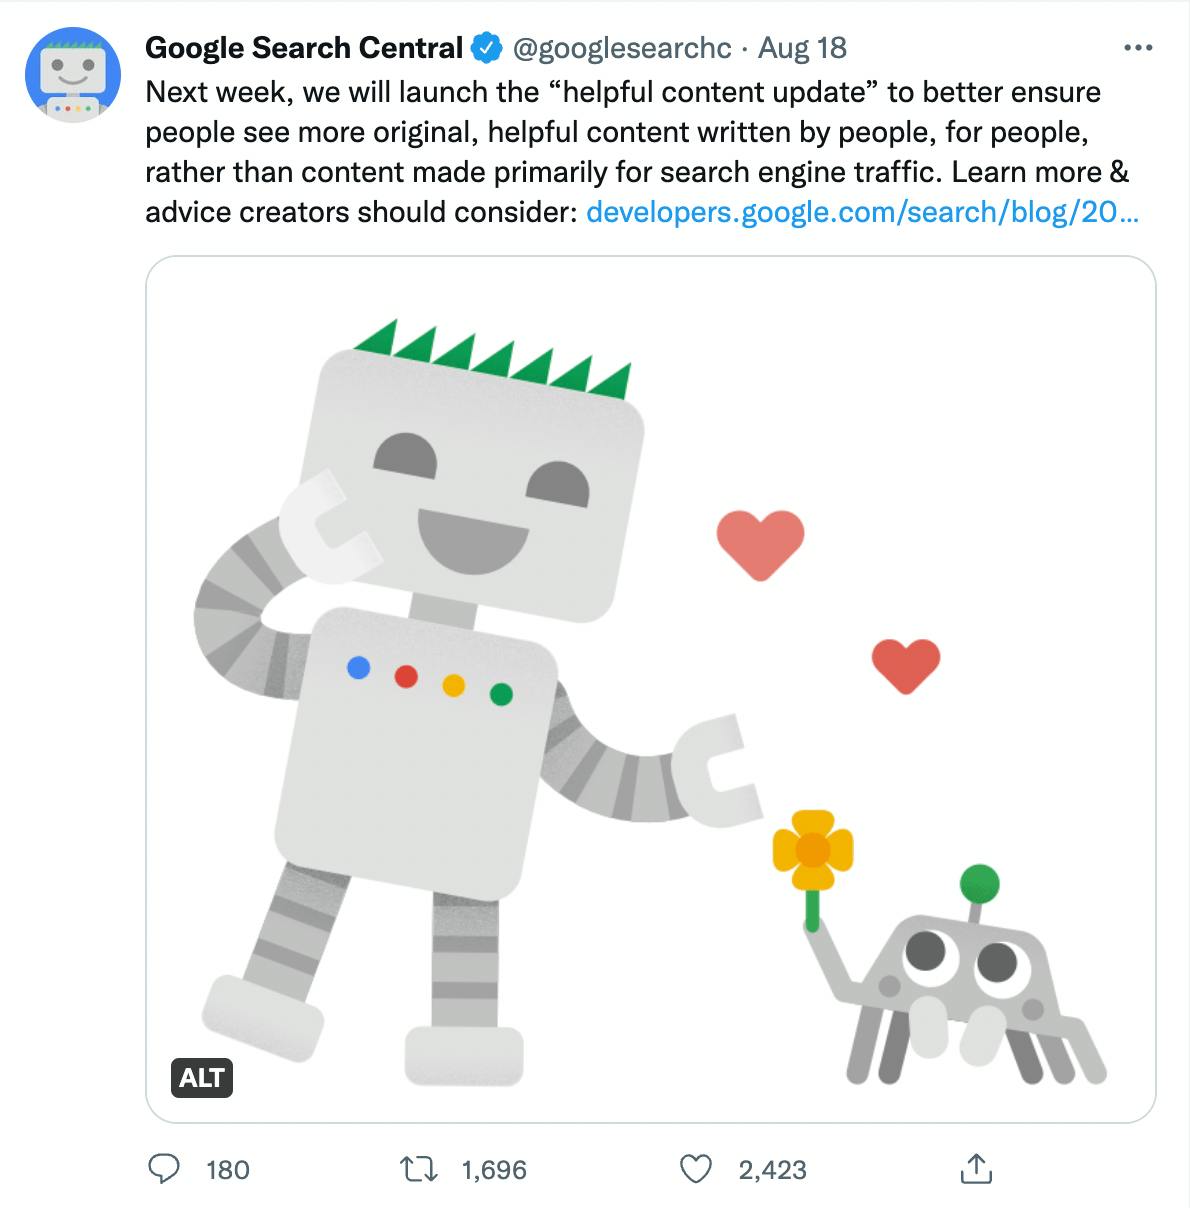 Snipped tweet from Google Search Central's Twitter account. Text: "Next week, we will launch the helpful content update to better ensure people see more original, helpful content written by people, for people, rather than content made primarily for search engine traffic."